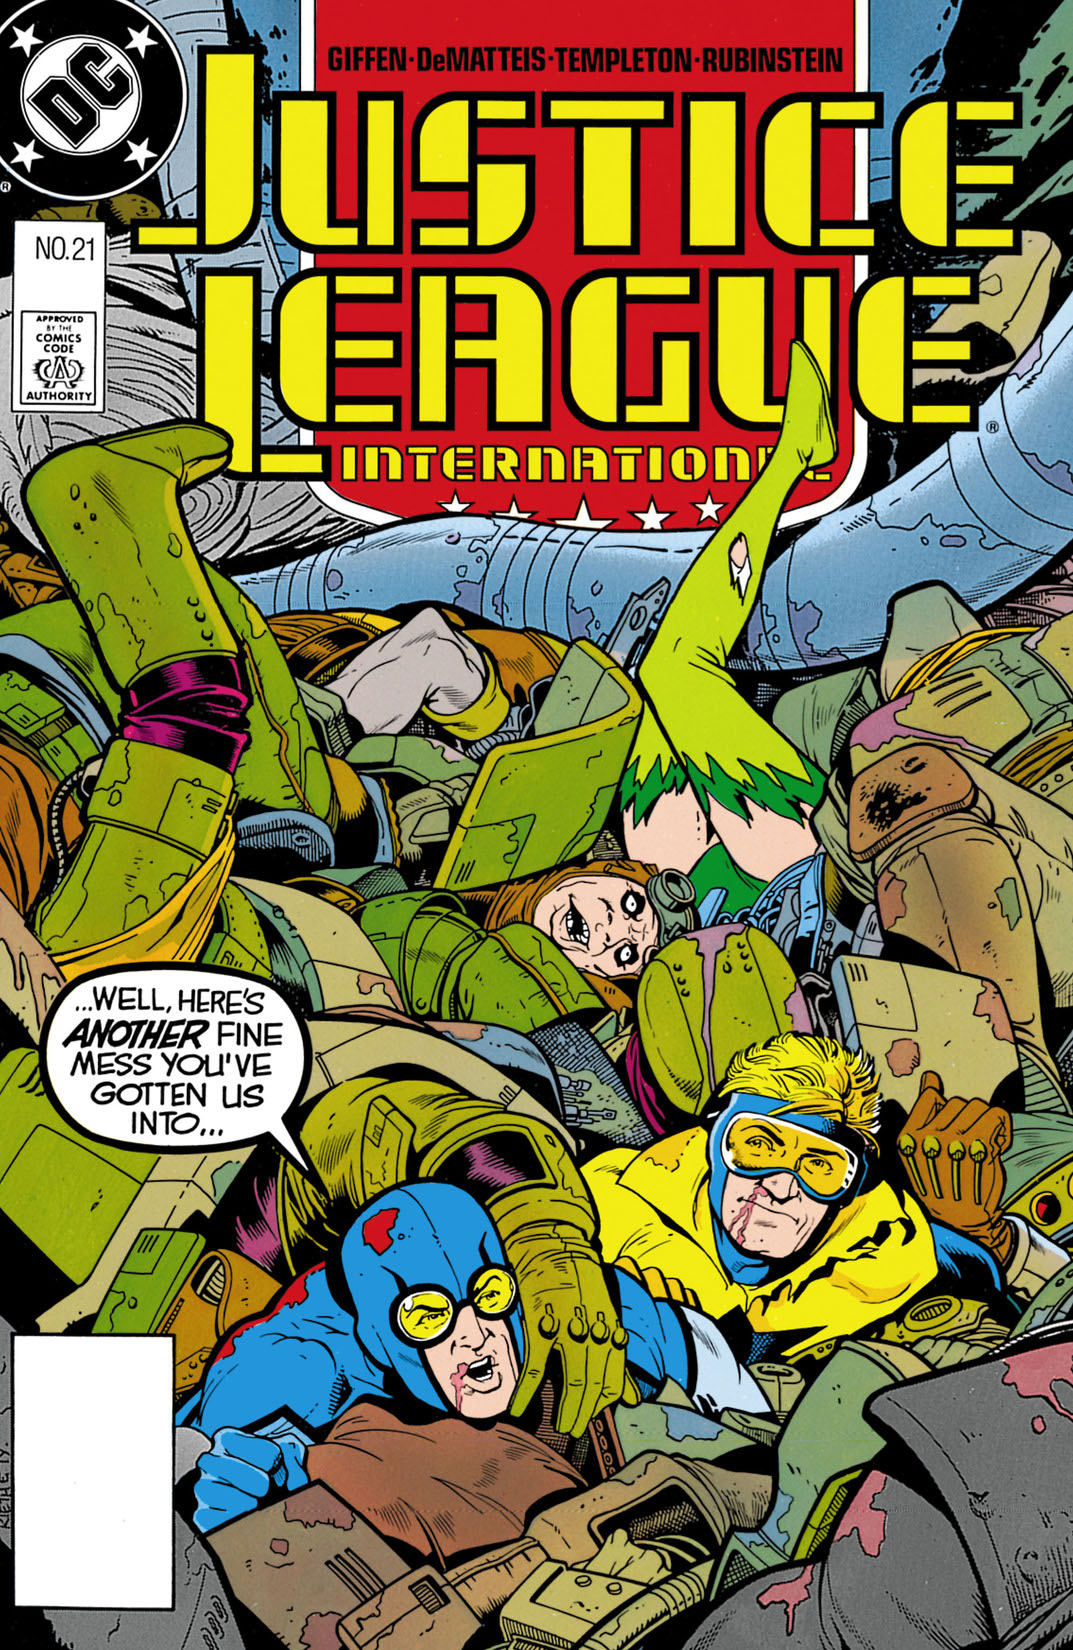 Justice League International (1987-) #21 preview images